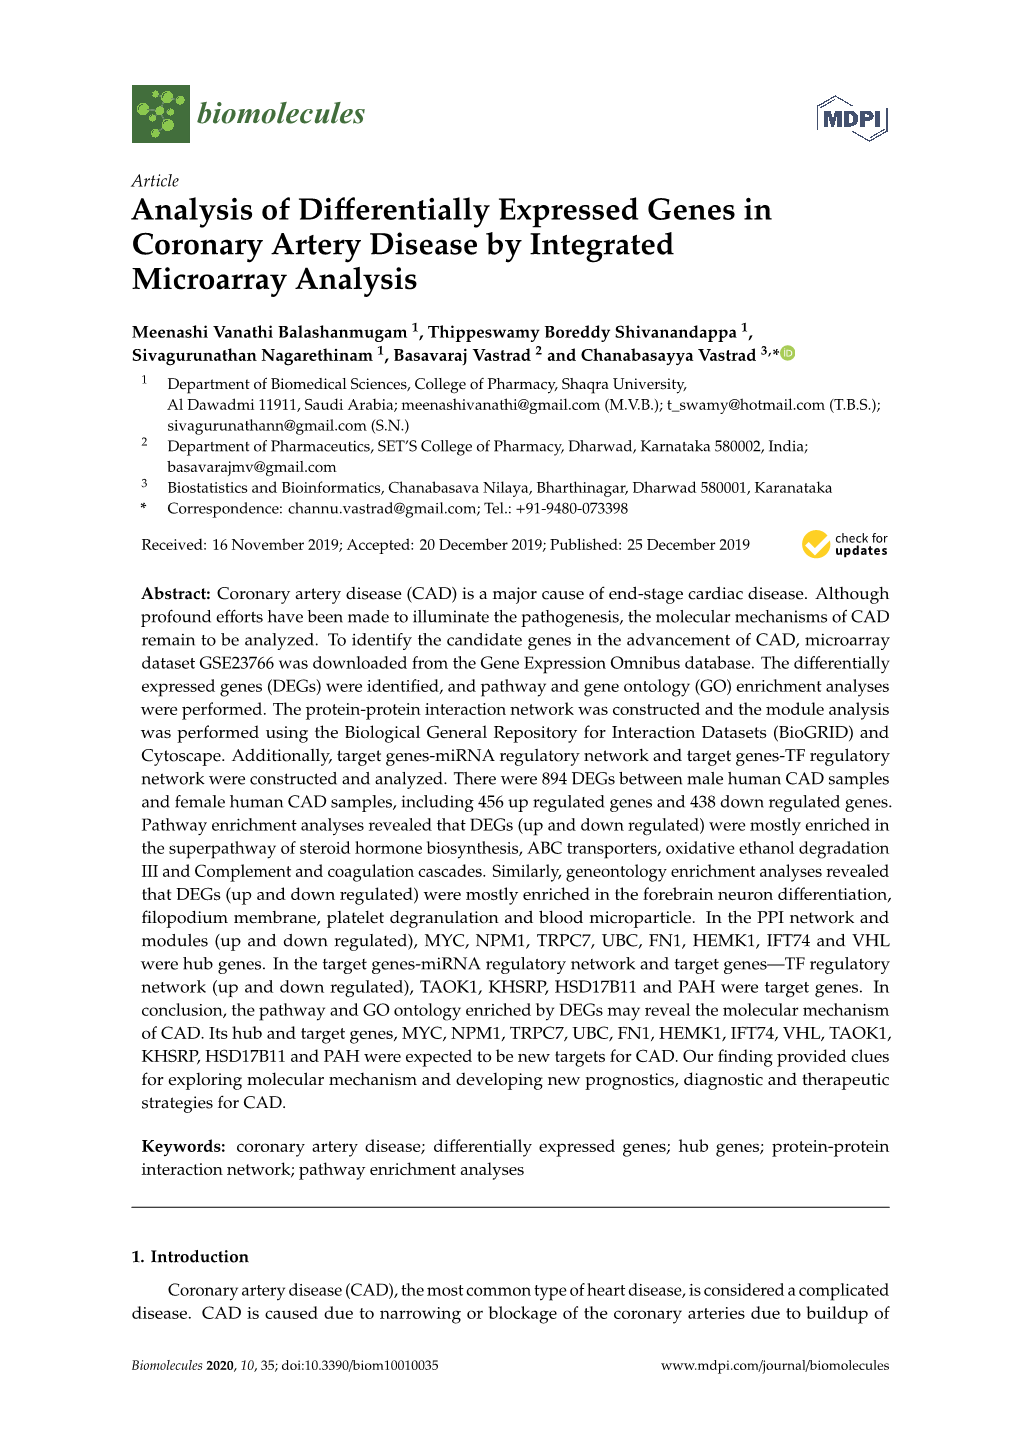 Analysis of Differentially Expressed Genes in Coronary Artery Disease by Integrated Microarray Analysis